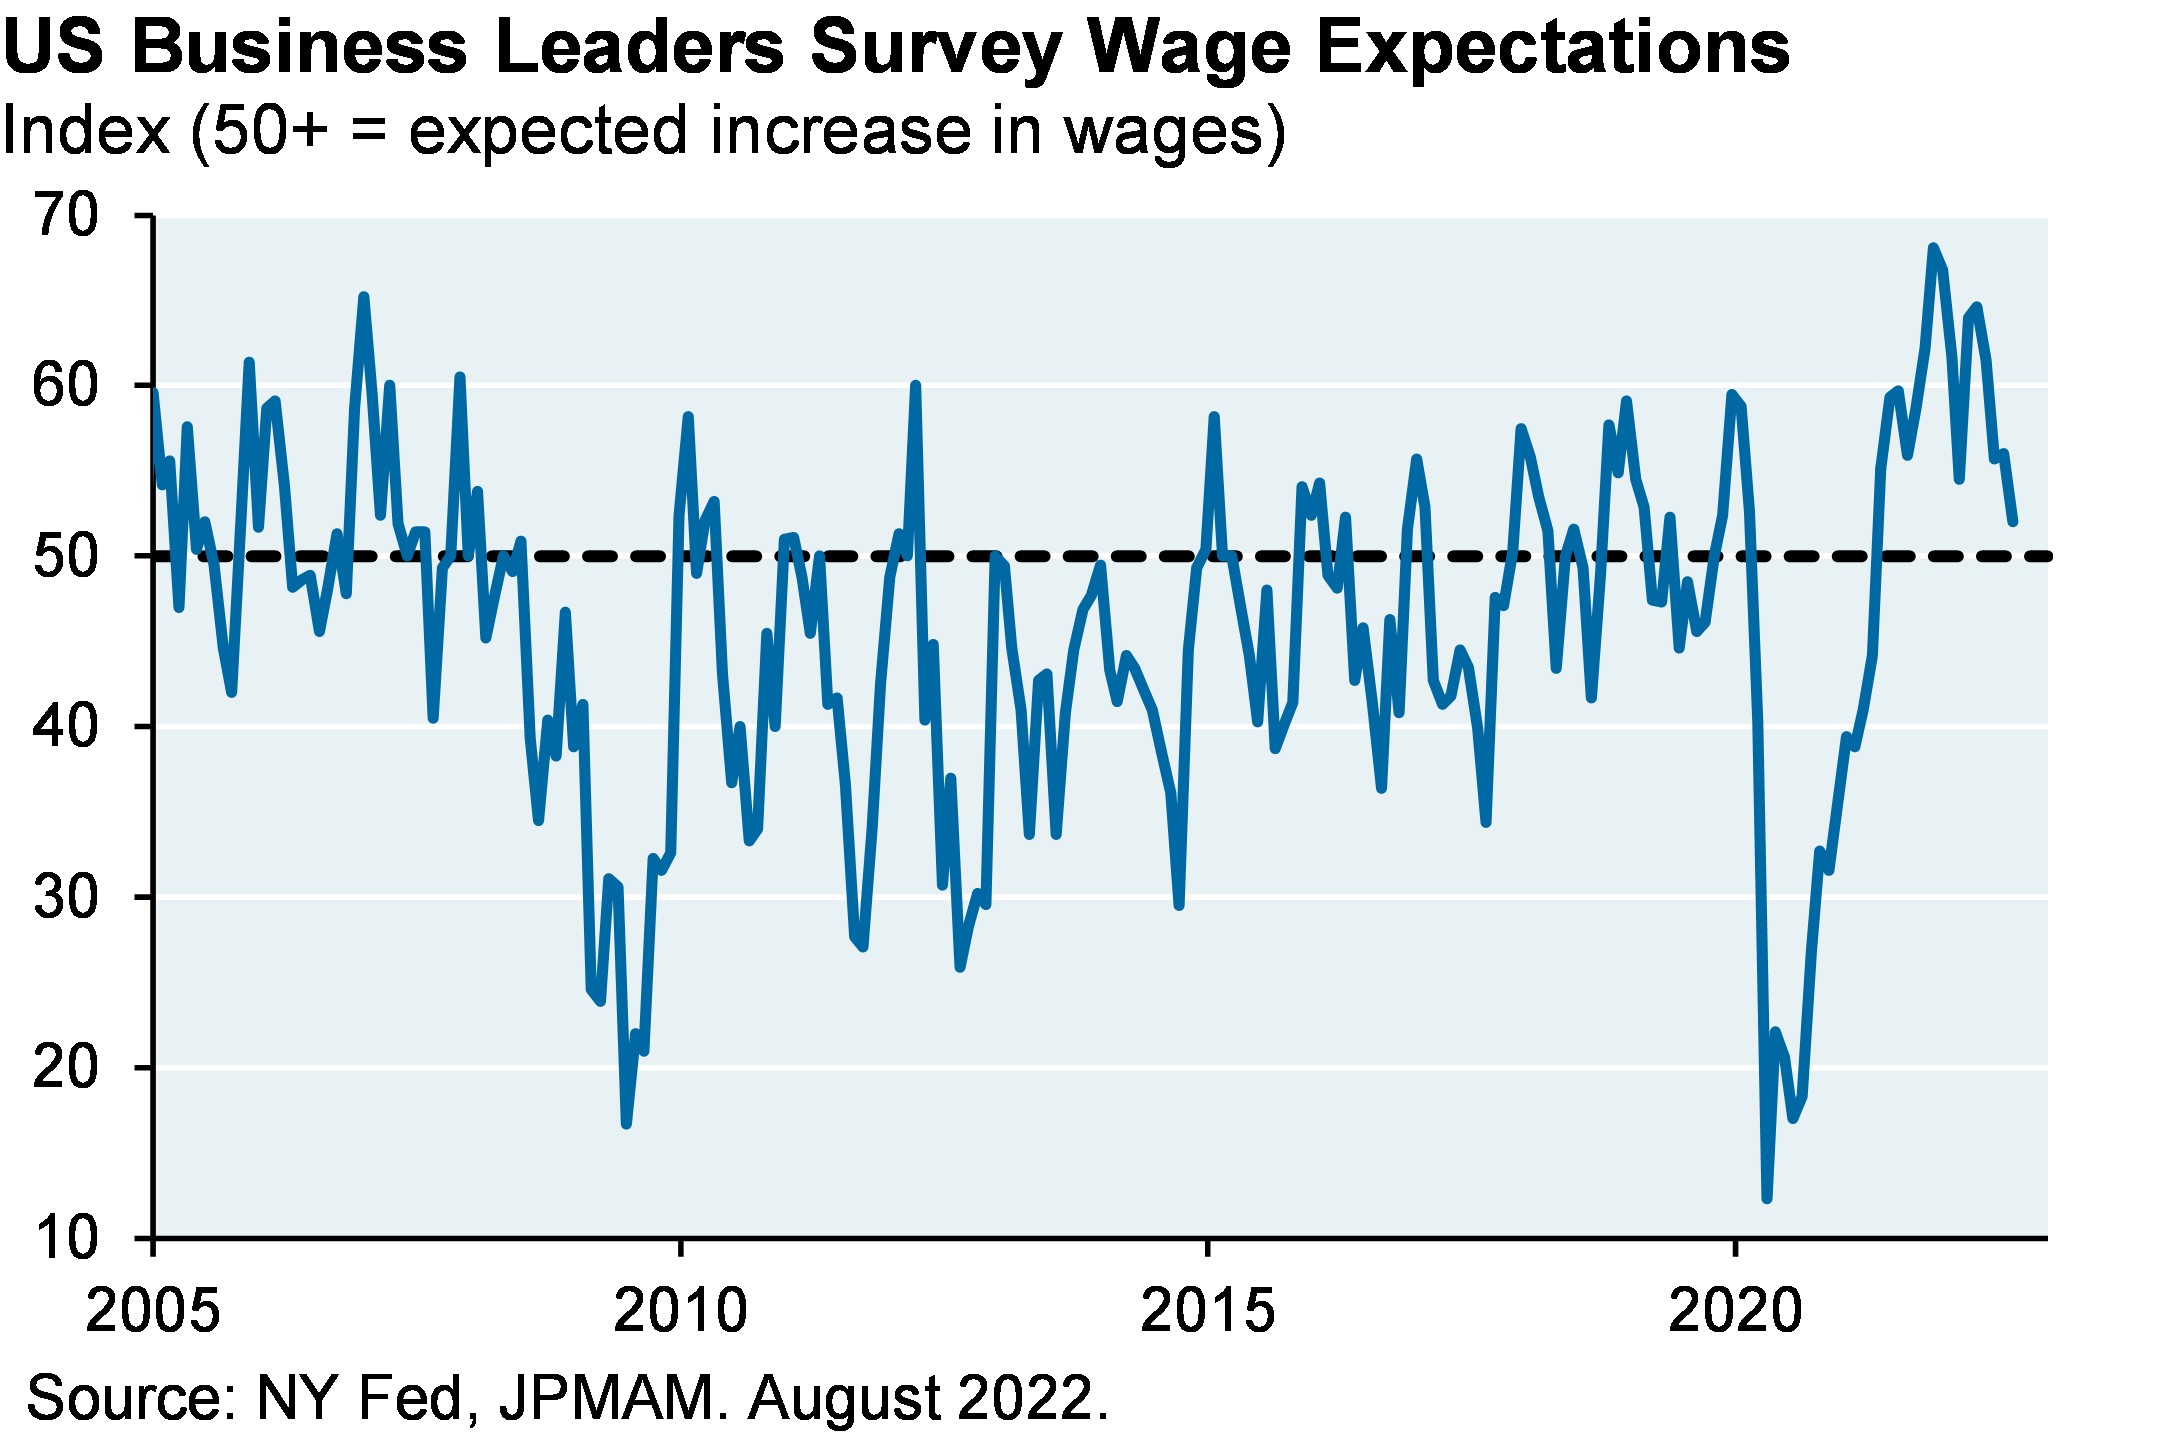 US Business Leaders Survey Wage Expectations